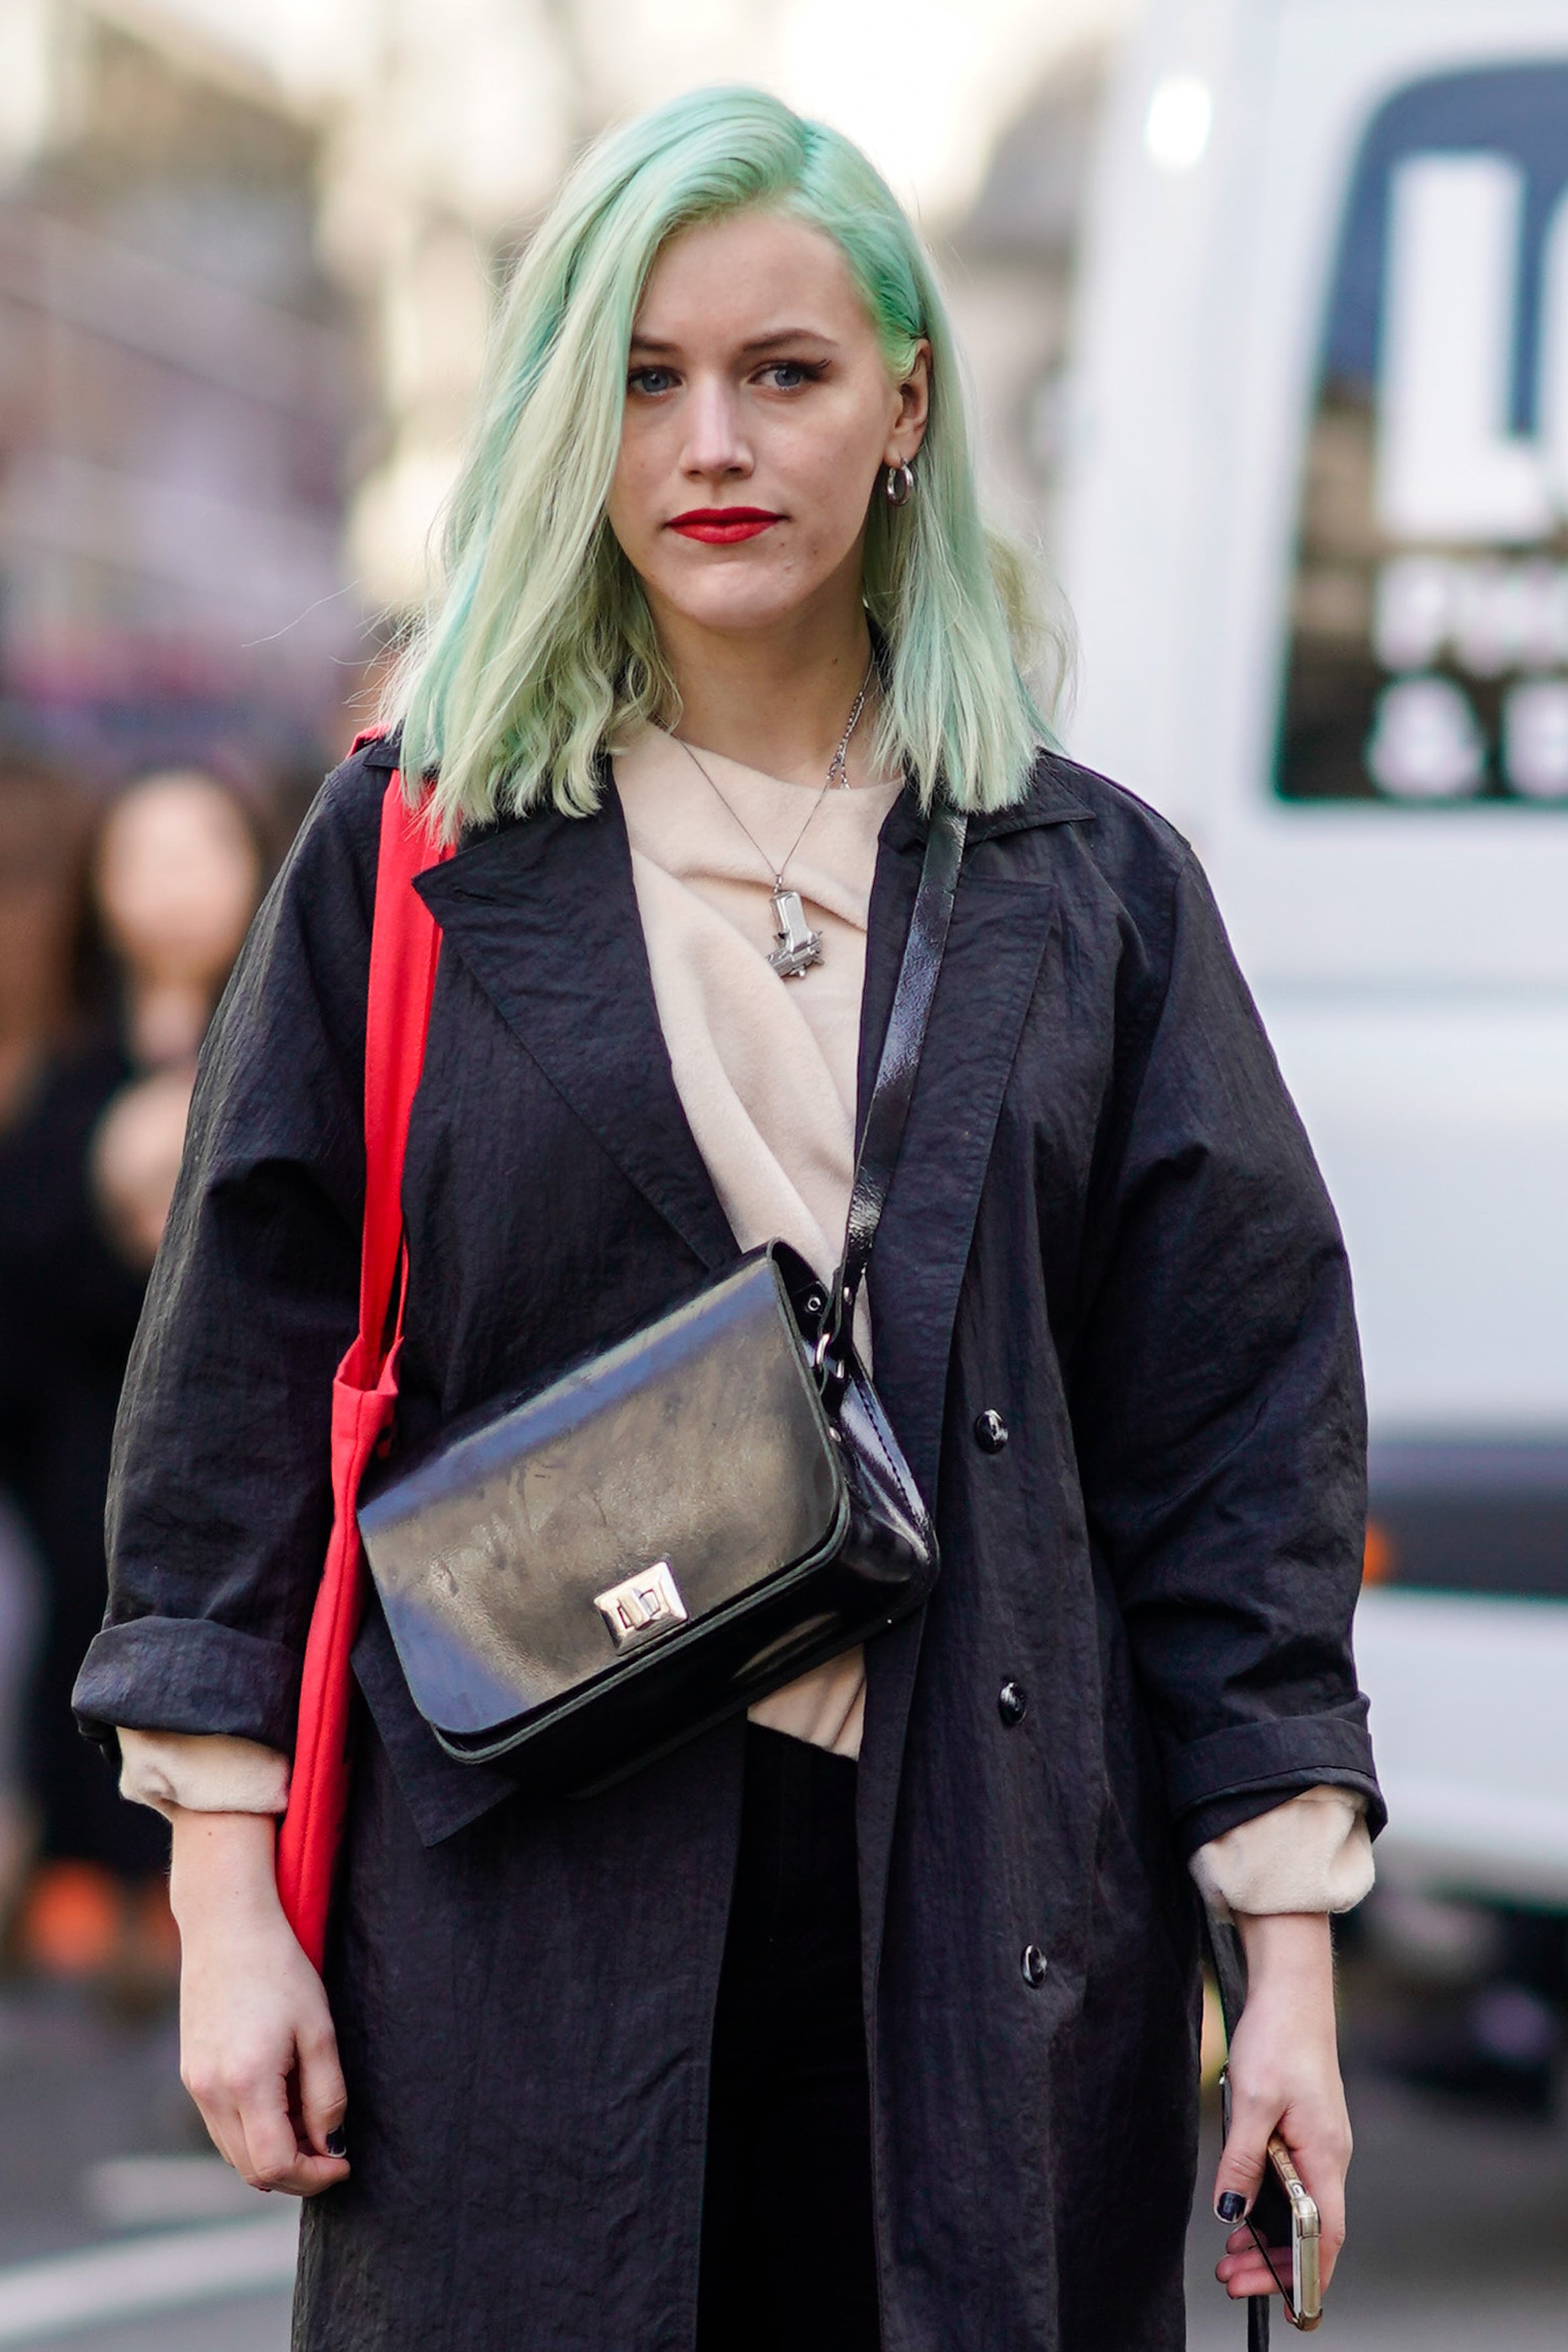 pastel green hair color